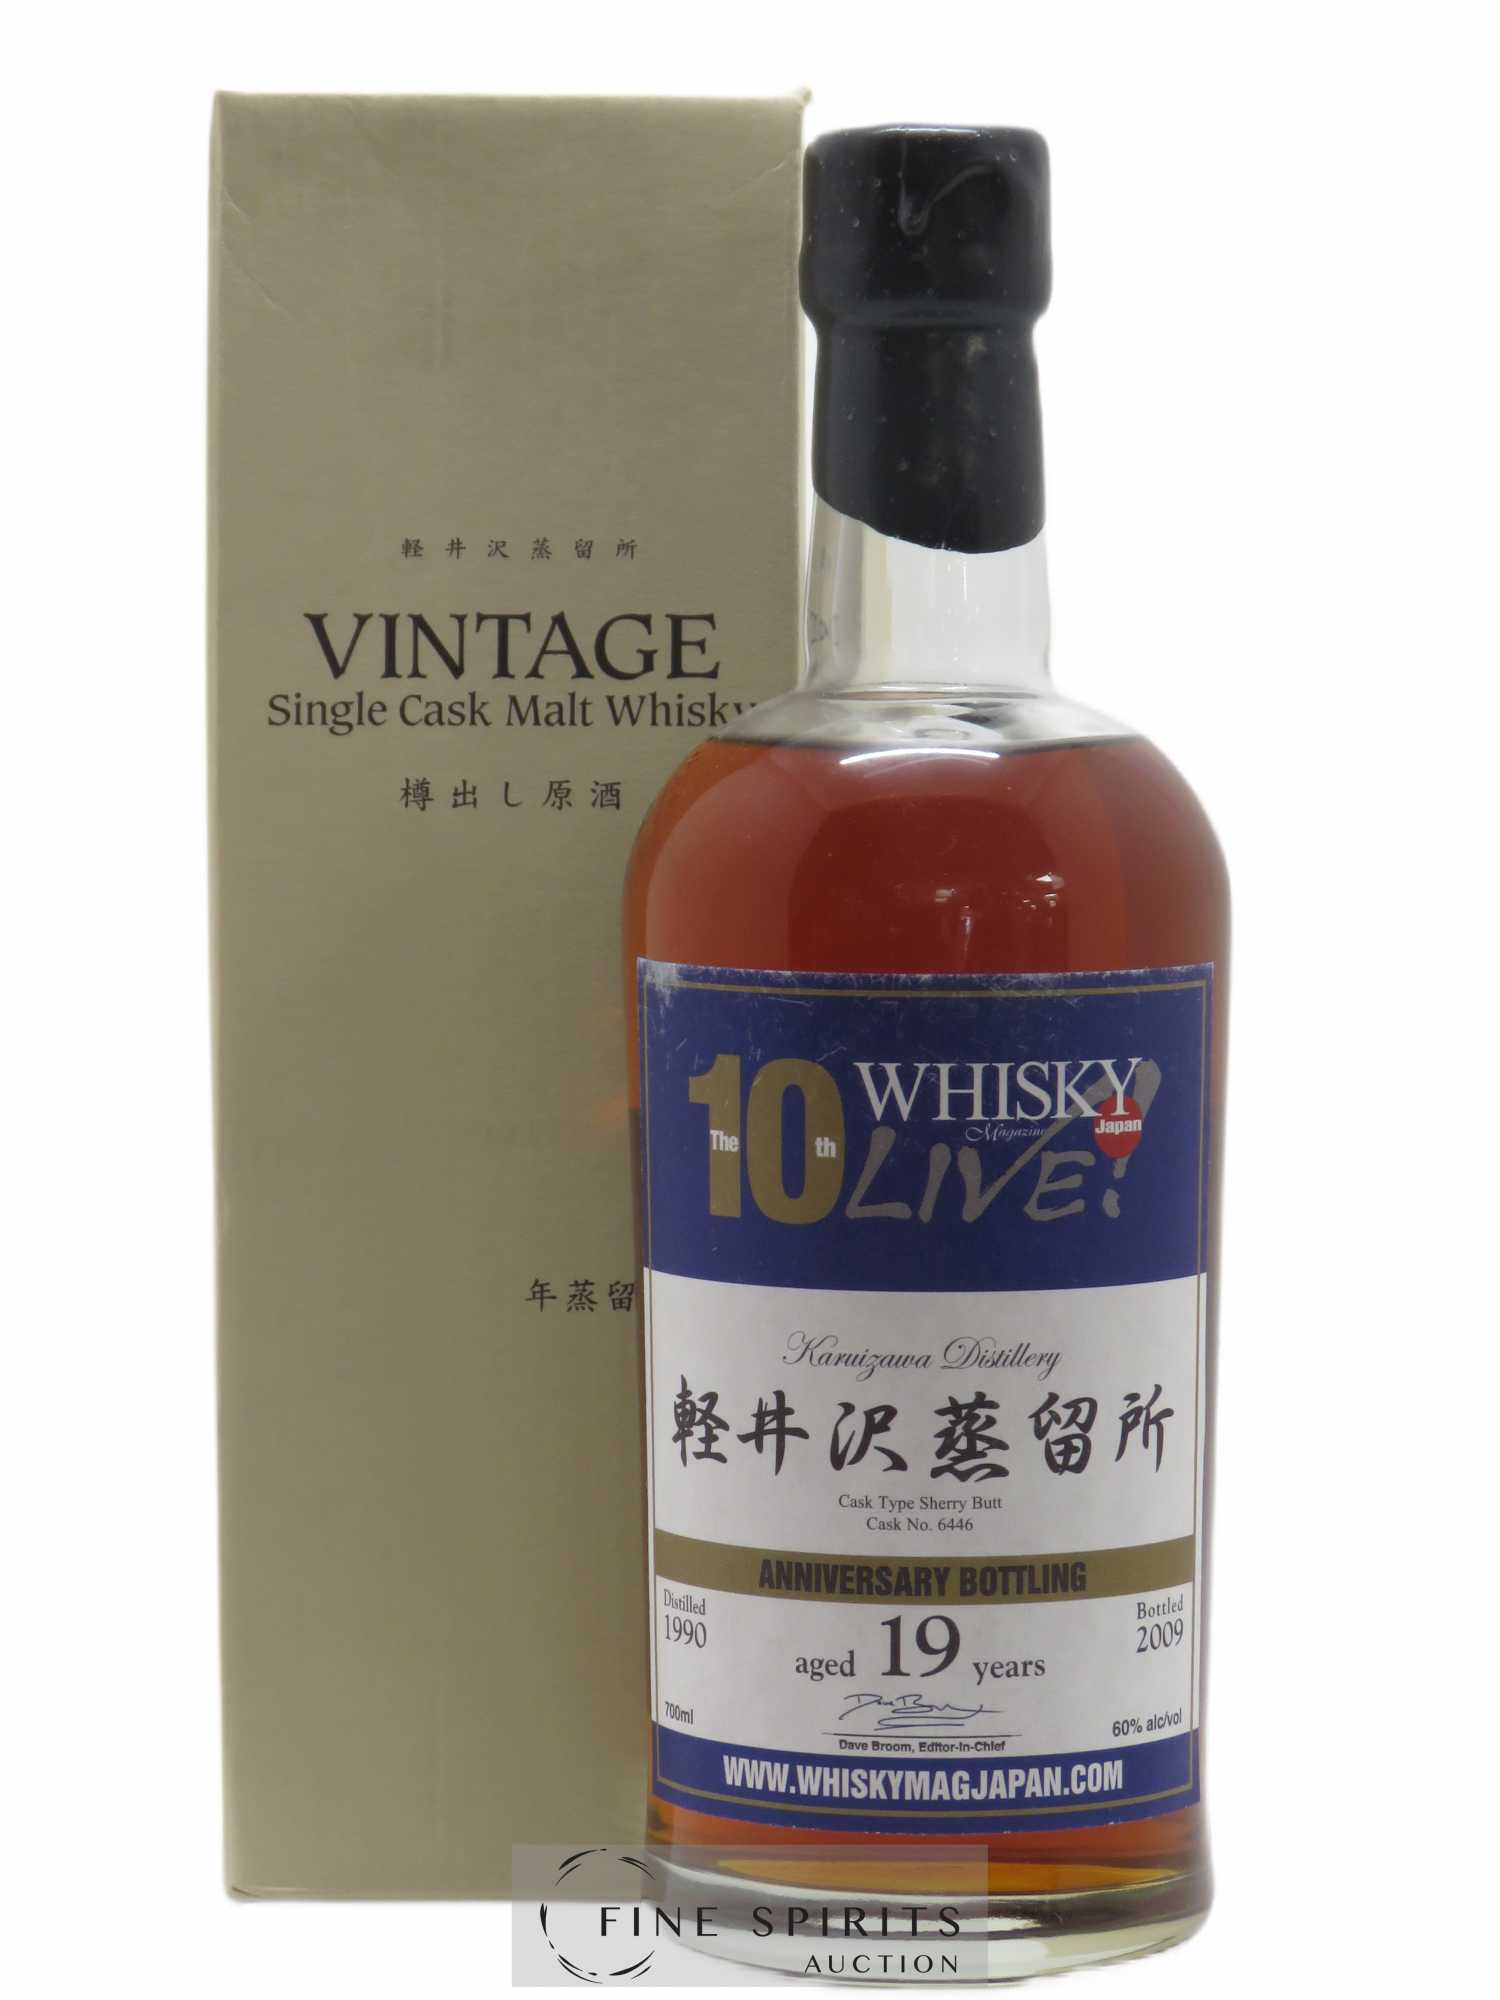 Karuizawa 19 years 1990 Of. The 10th Whisky Live Sherry Butt - Cask n° 6446 - bottled 2009 Anniversary Bottling